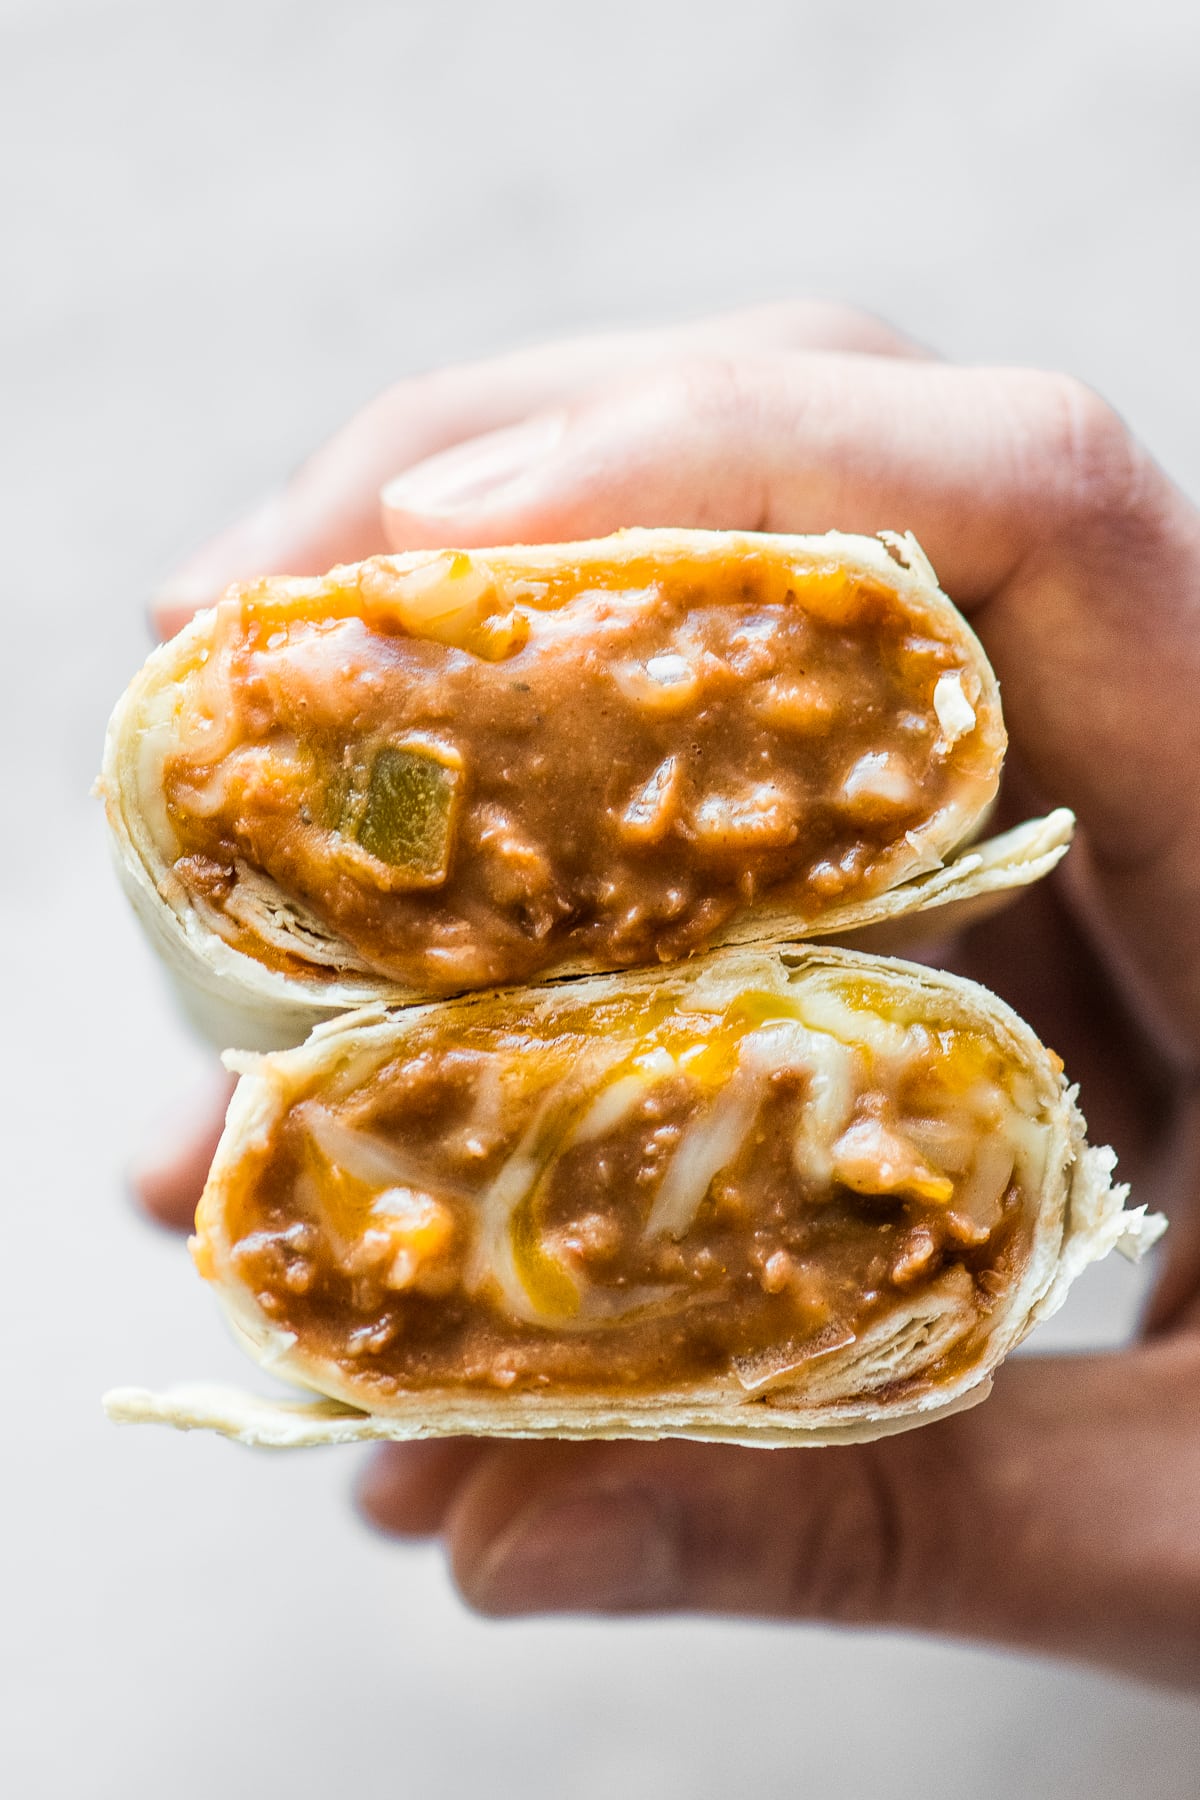 A bean and cheese burrito cut in half with the filling coming out.